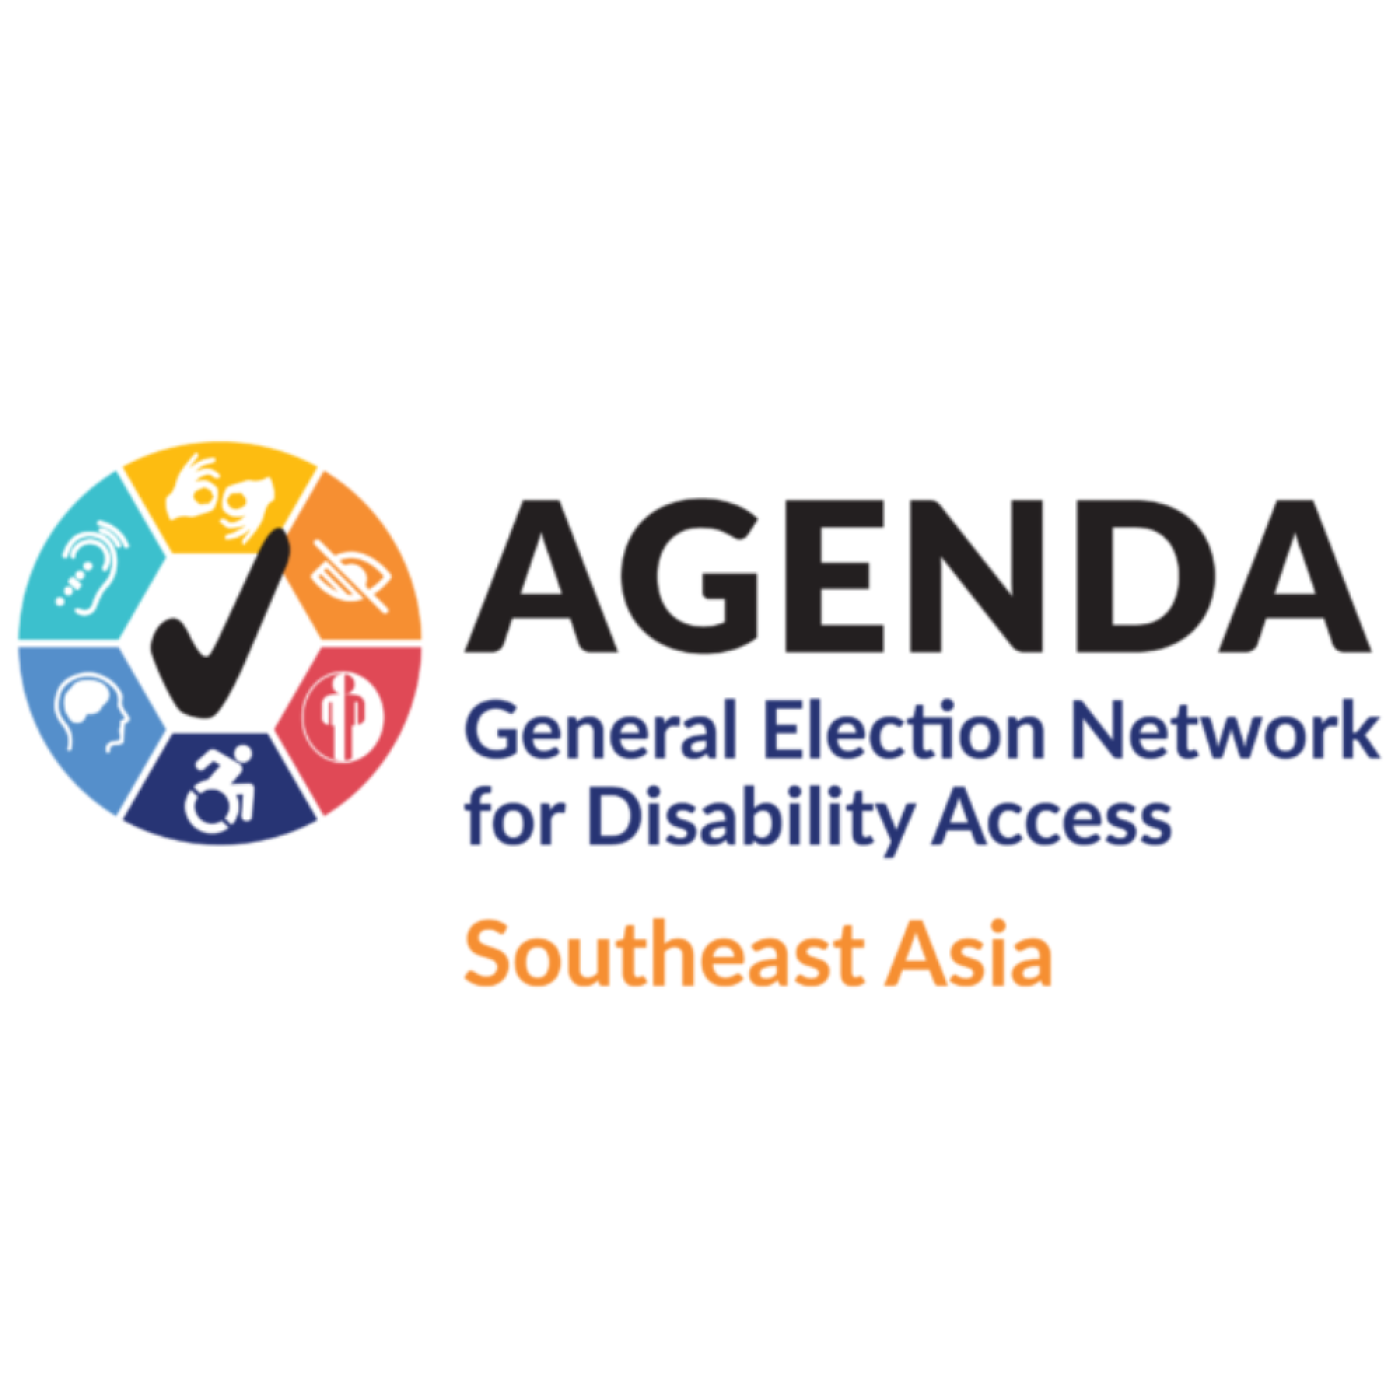 AGENDA logo: a multicolor wheel with six small icons and a large checkmark in the middle. To the right of the wheel, black text reading, "AGENDA." Under that, navy blue text reading "General Election Network for Disability Access." Under that, orange text reading "Southeast Asia".